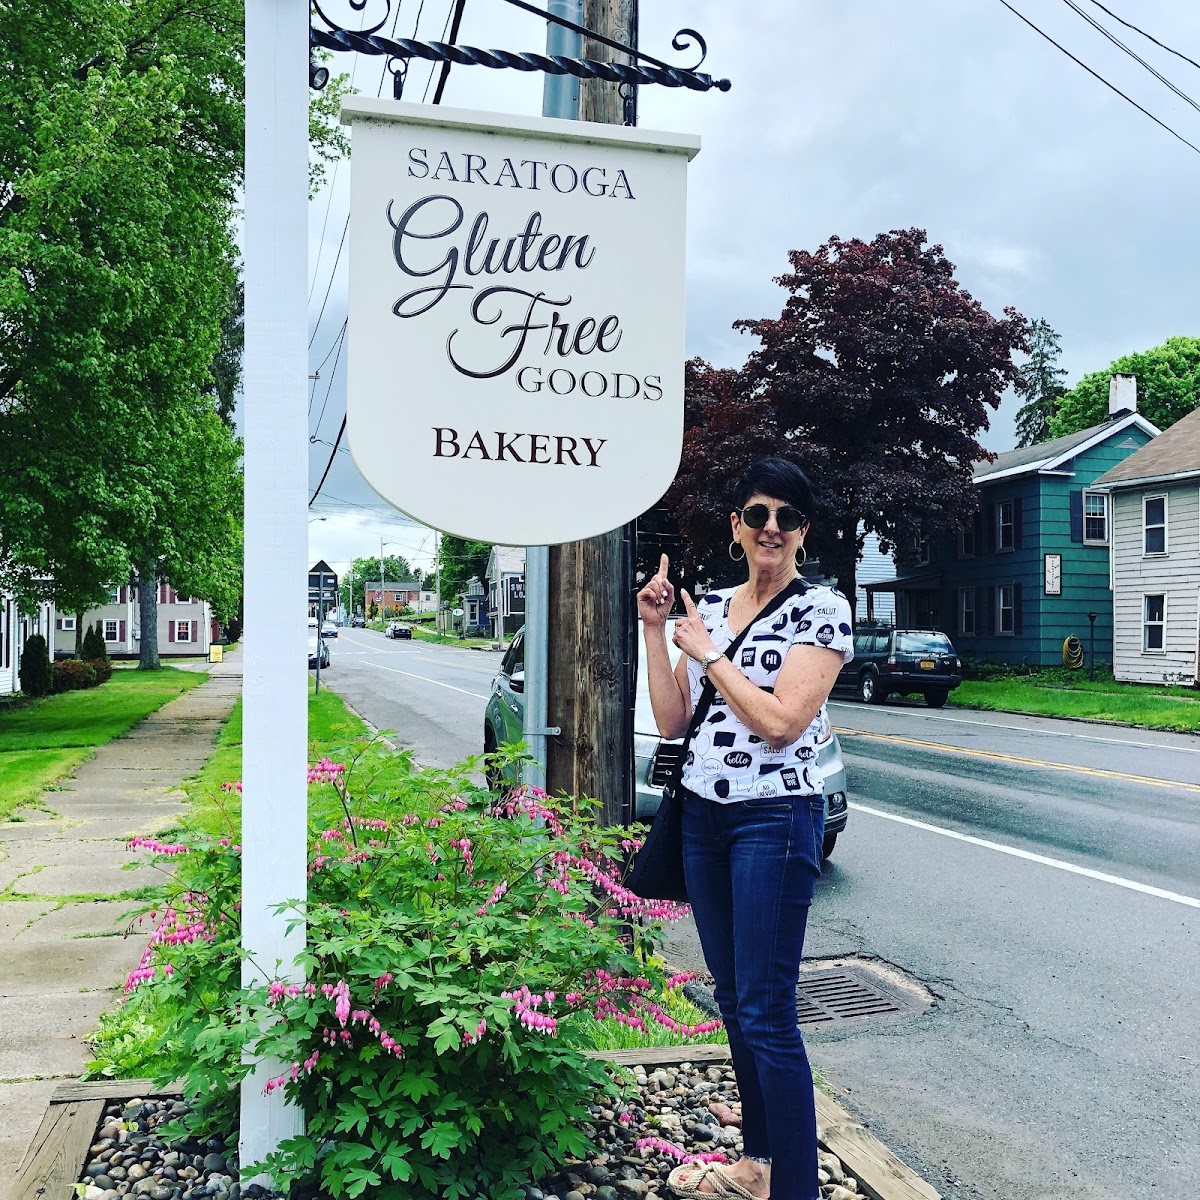 Traveled from RI to spend some time in Saratoga . Our first stop was here for lunch and goodies. Loved the sign on door that said “ No Gluten”..